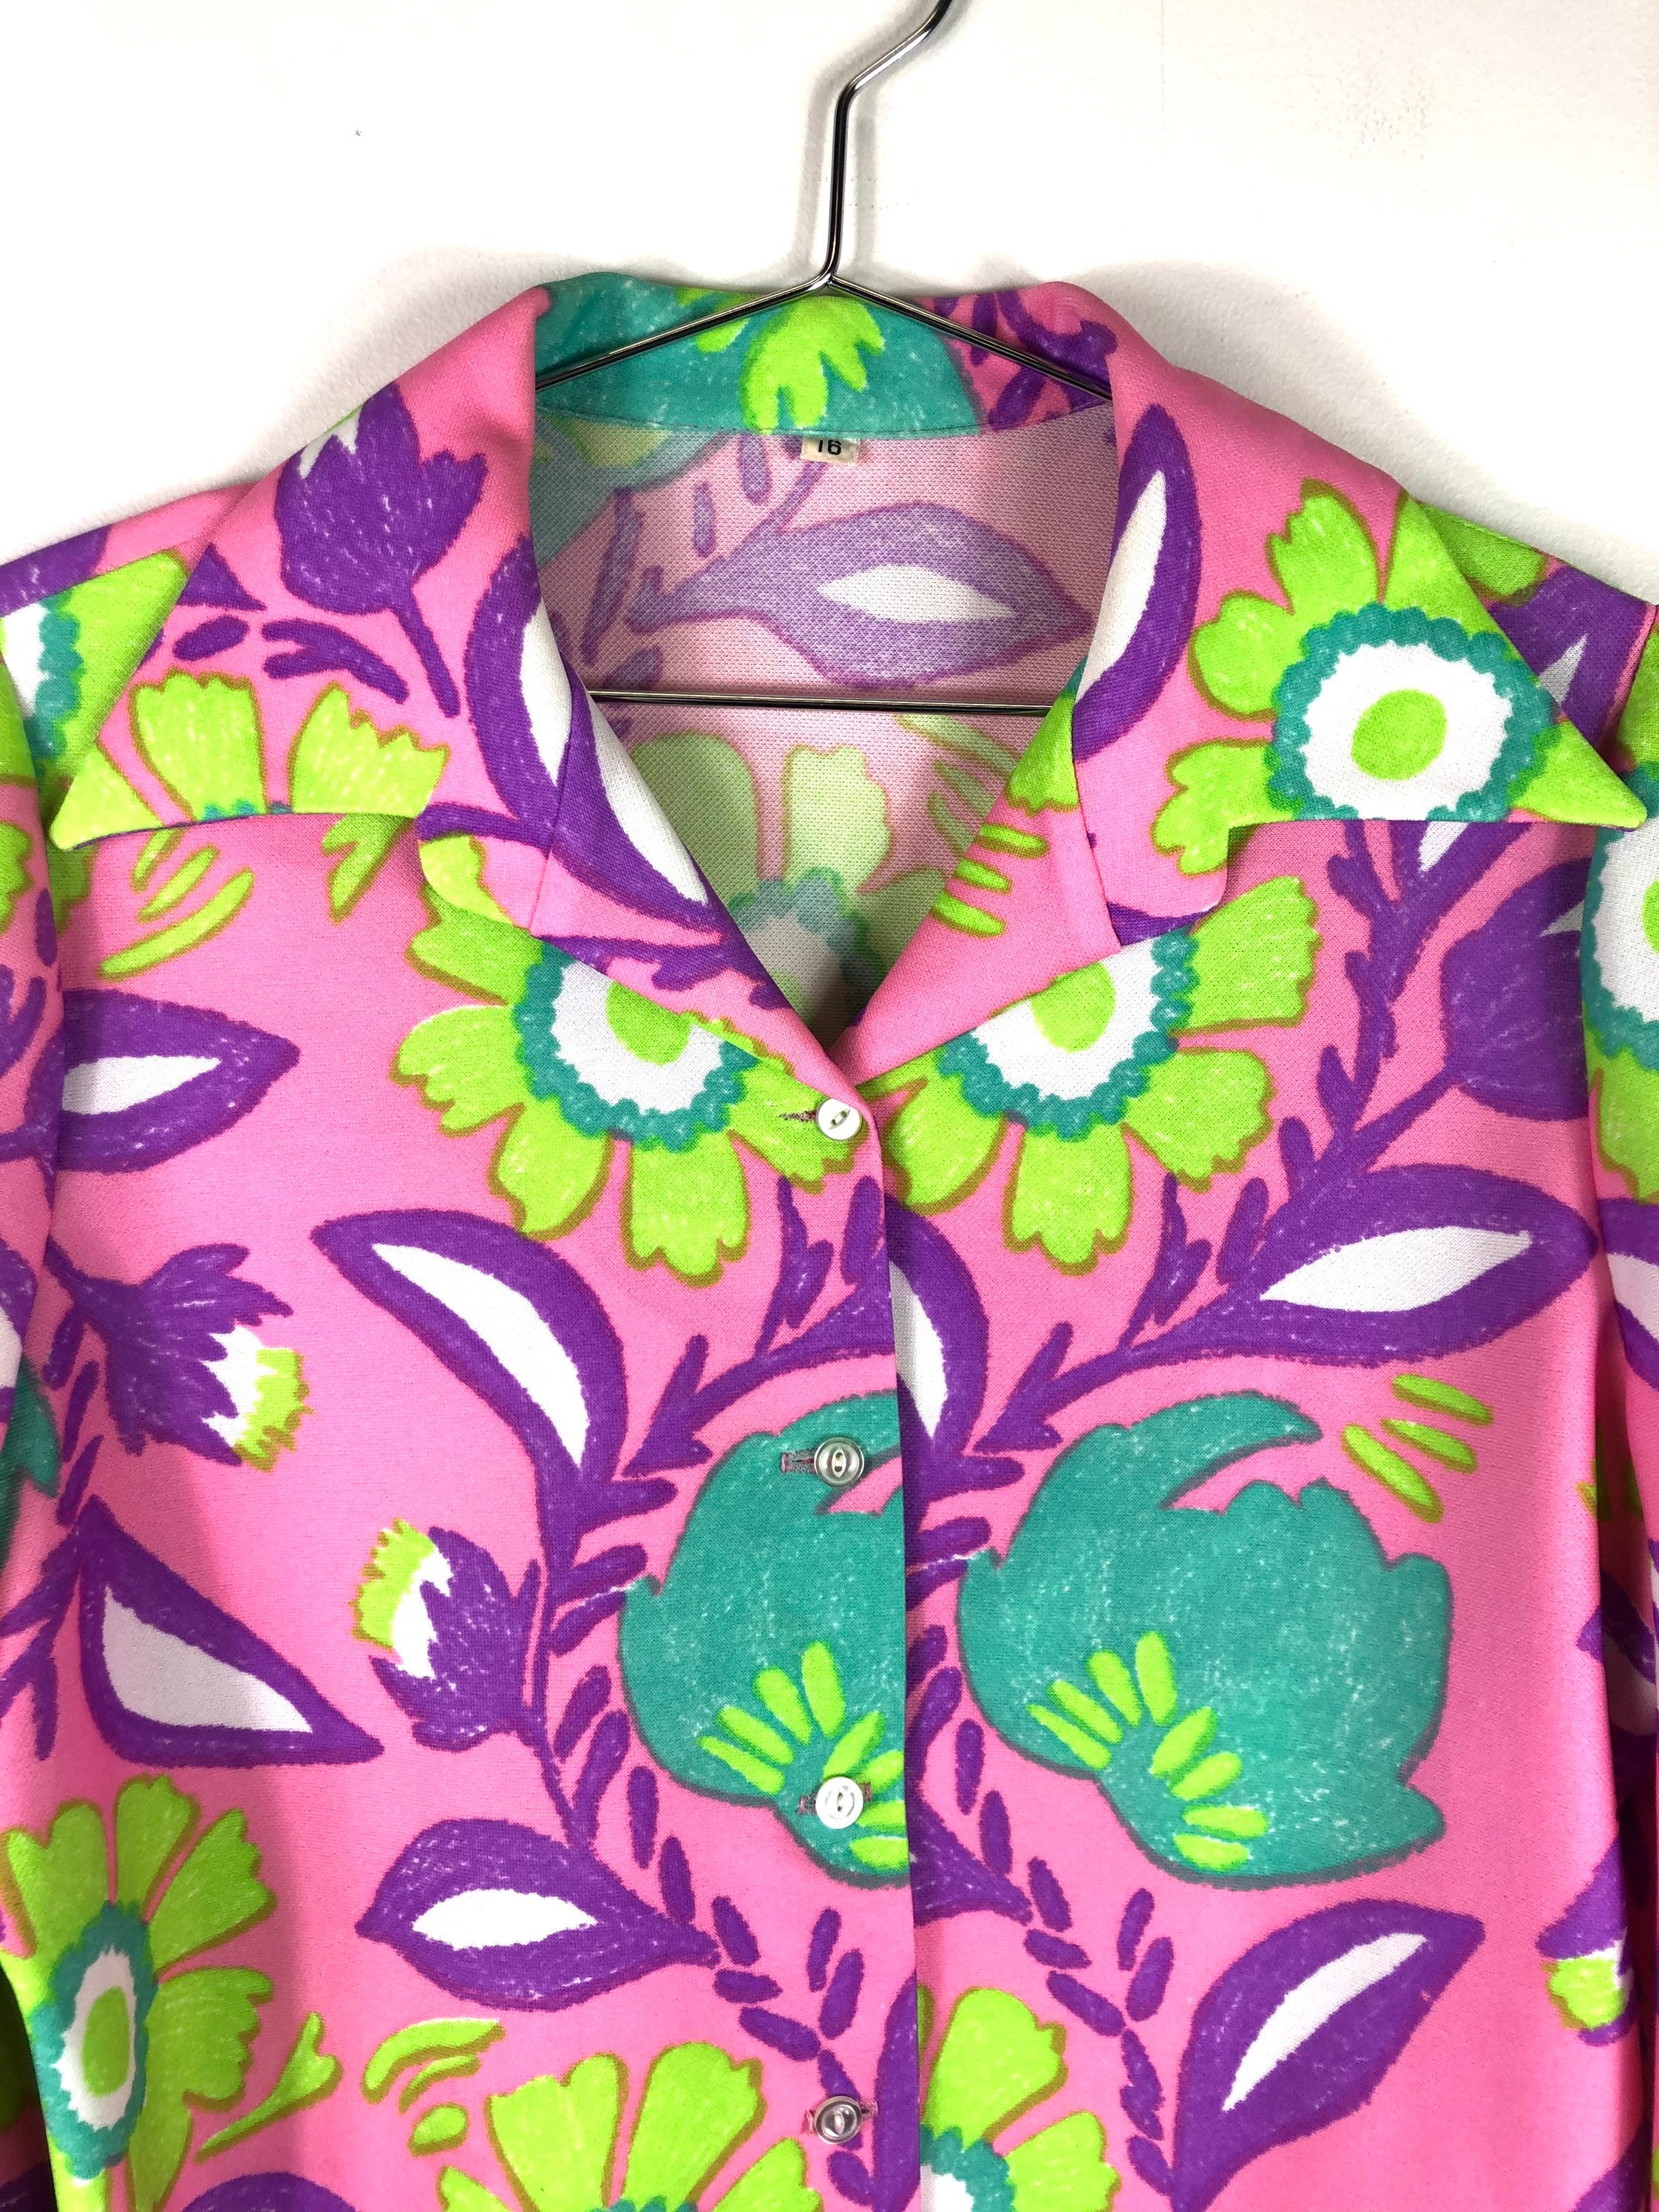 Flower Power 60s 70s Button Down Shirt Psychedelic Pink Green | Etsy